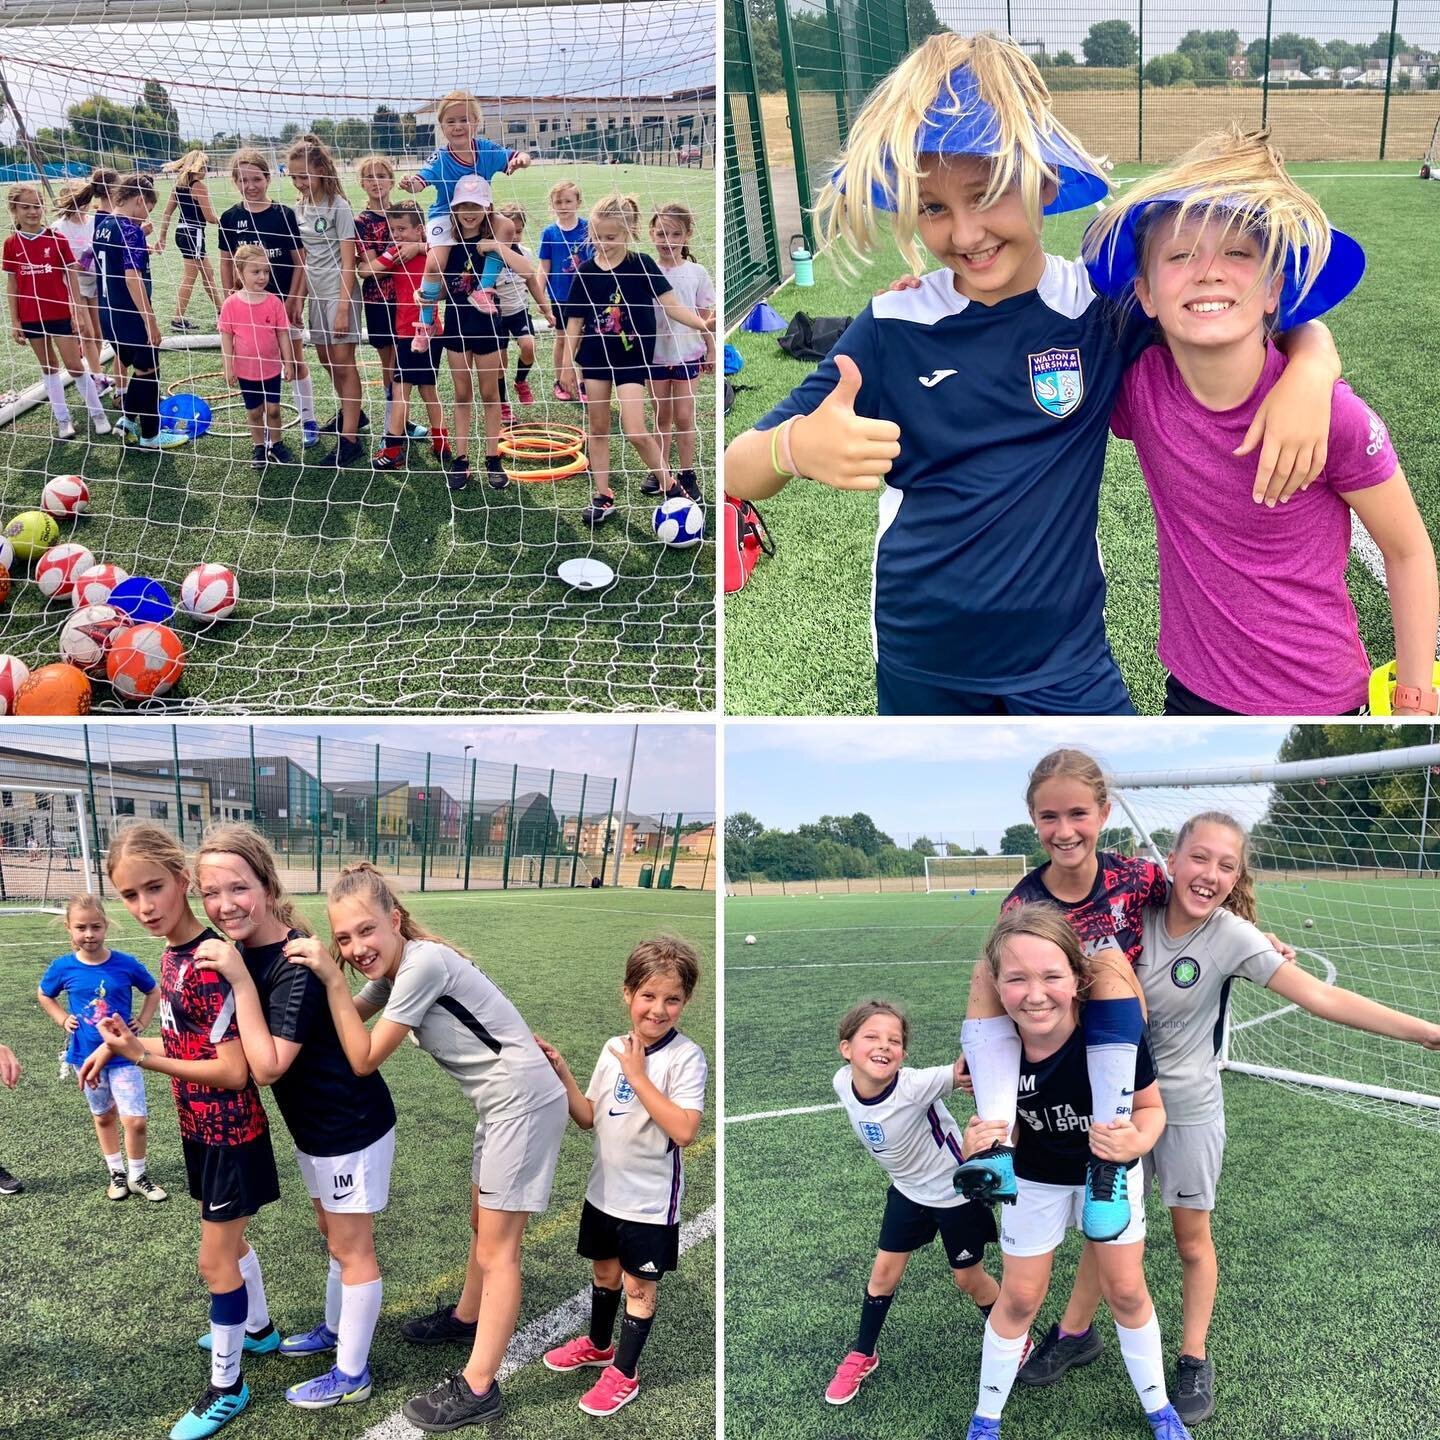 Looking back on our summer camp fun and excited for October half term Halloween camp 🎃👻🧙&zwj;♀️

Fun memories of our holiday camp and looking forward to our October half term camp 🎃🧙&zwj;♀️👻

#footbellas#football#girlsfootball#fun#girls#holiday